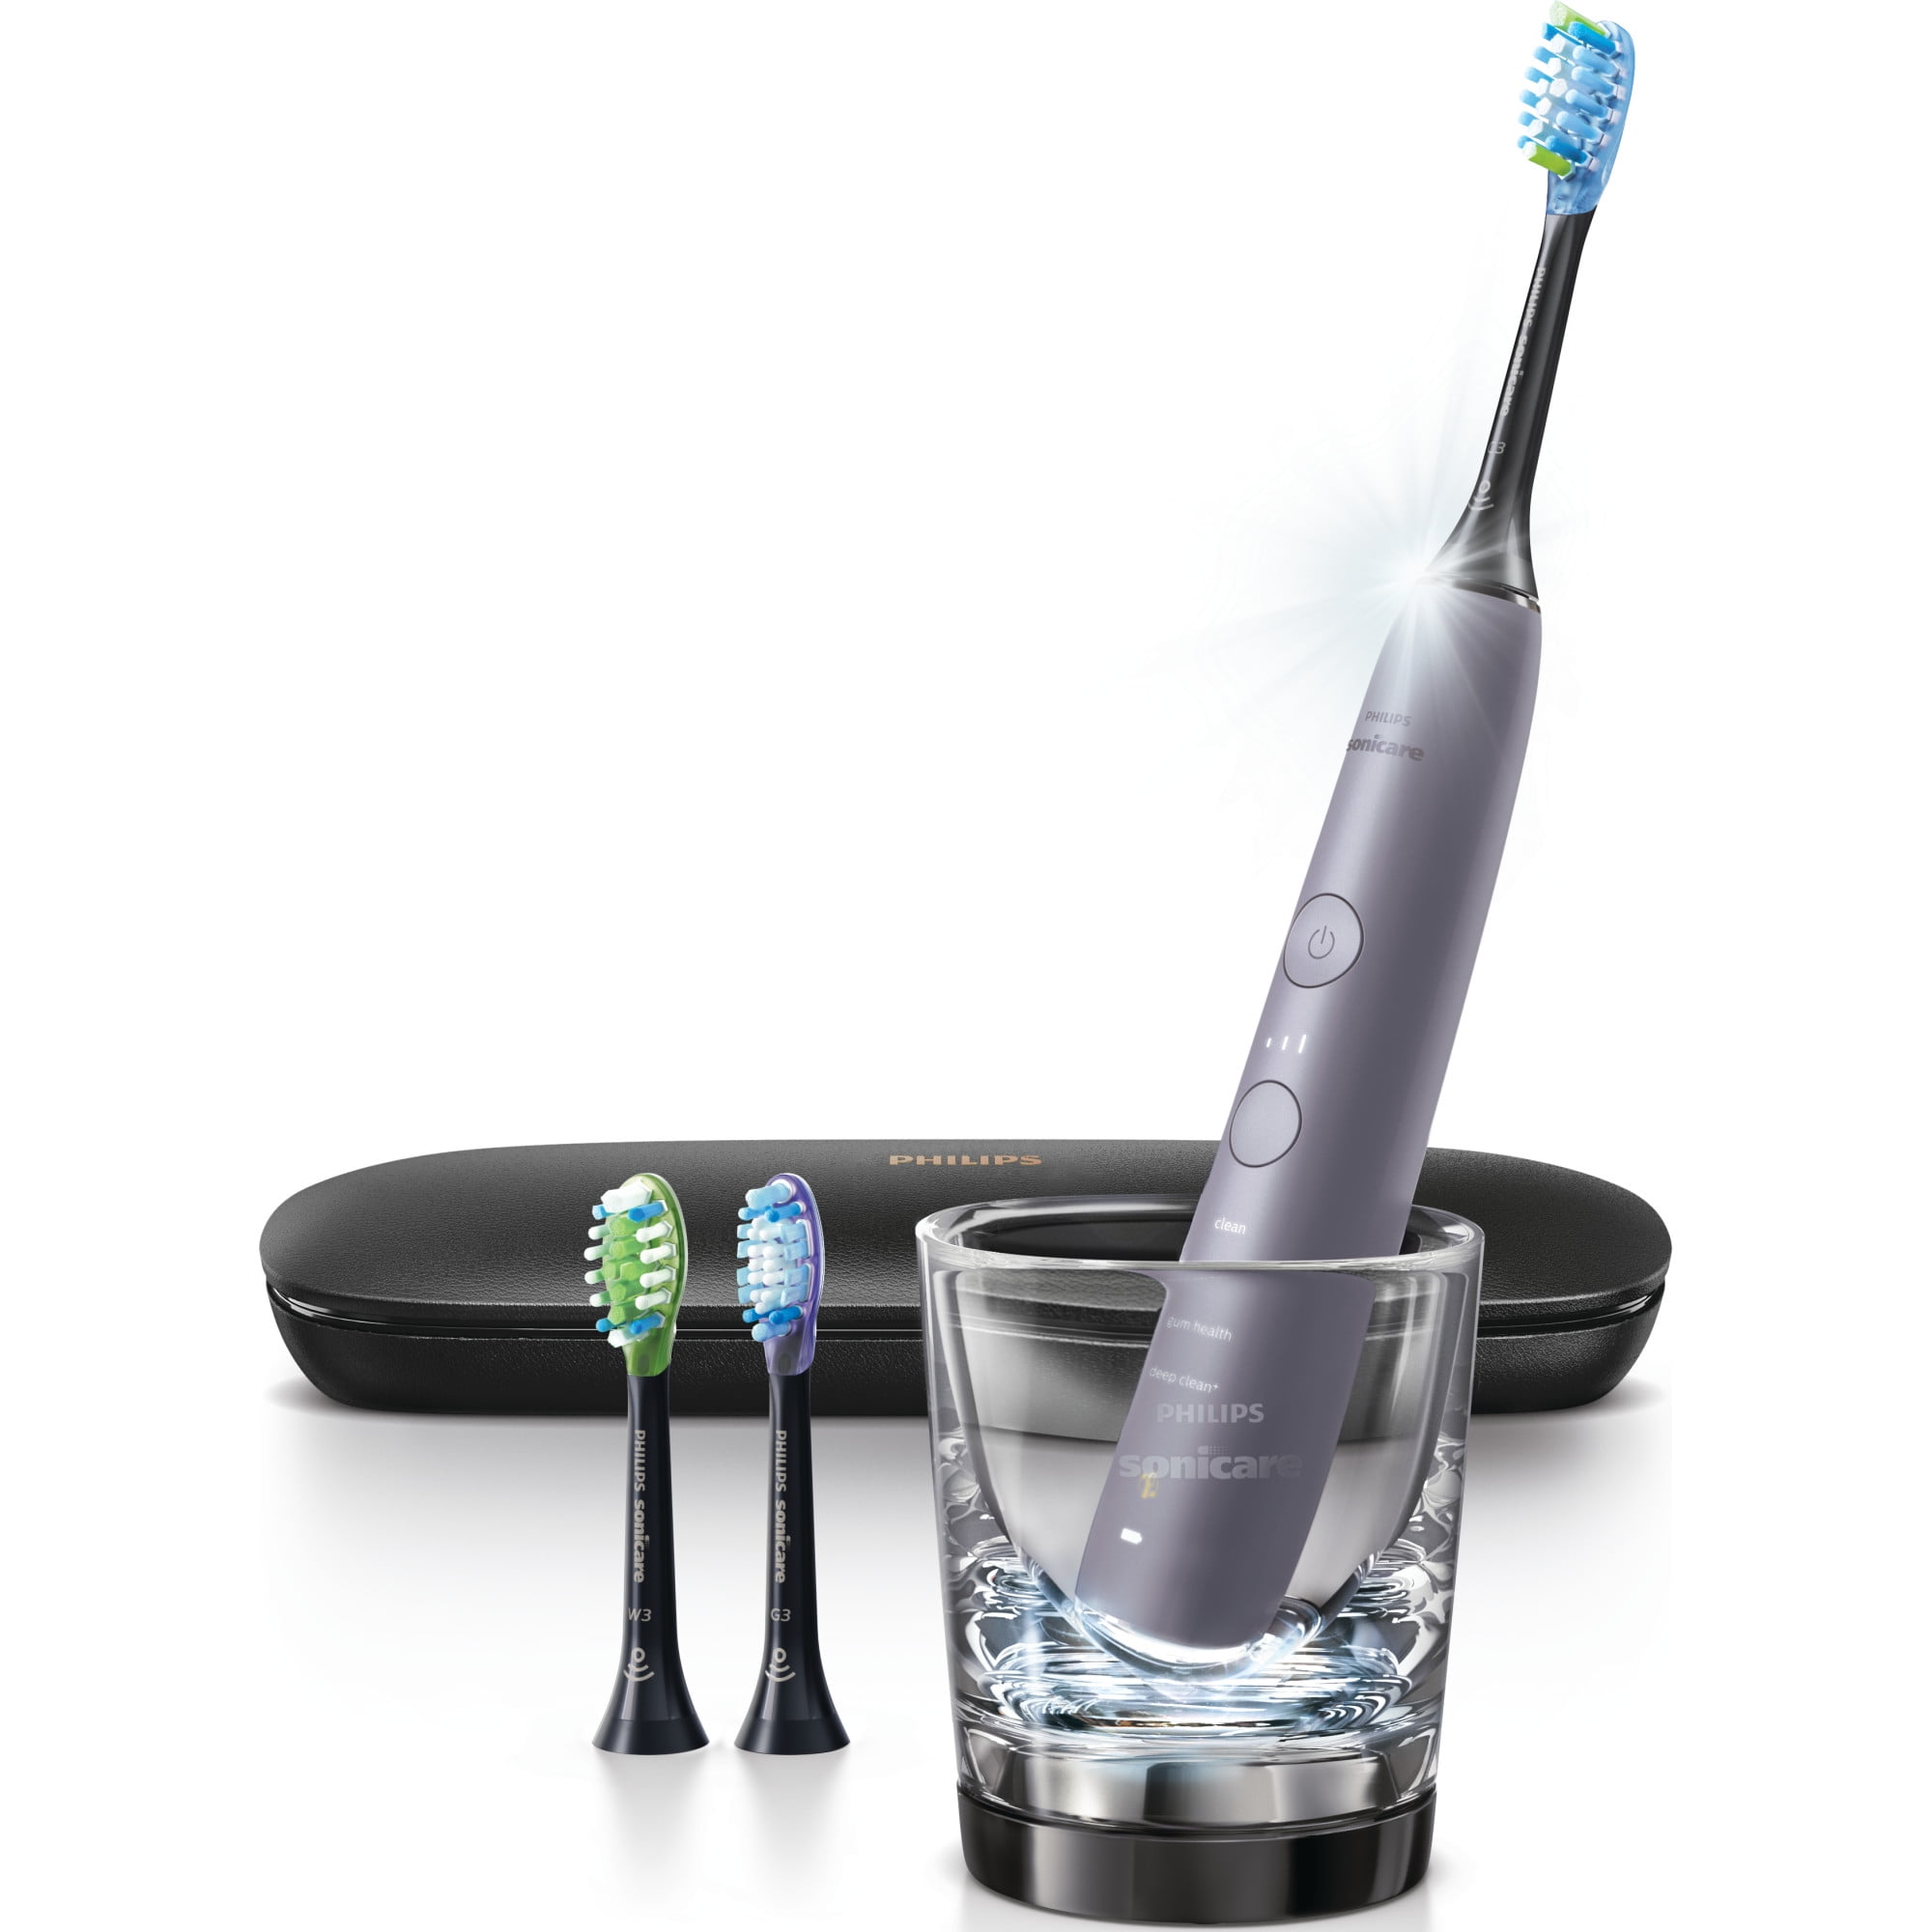 sonicare electric tooth brush